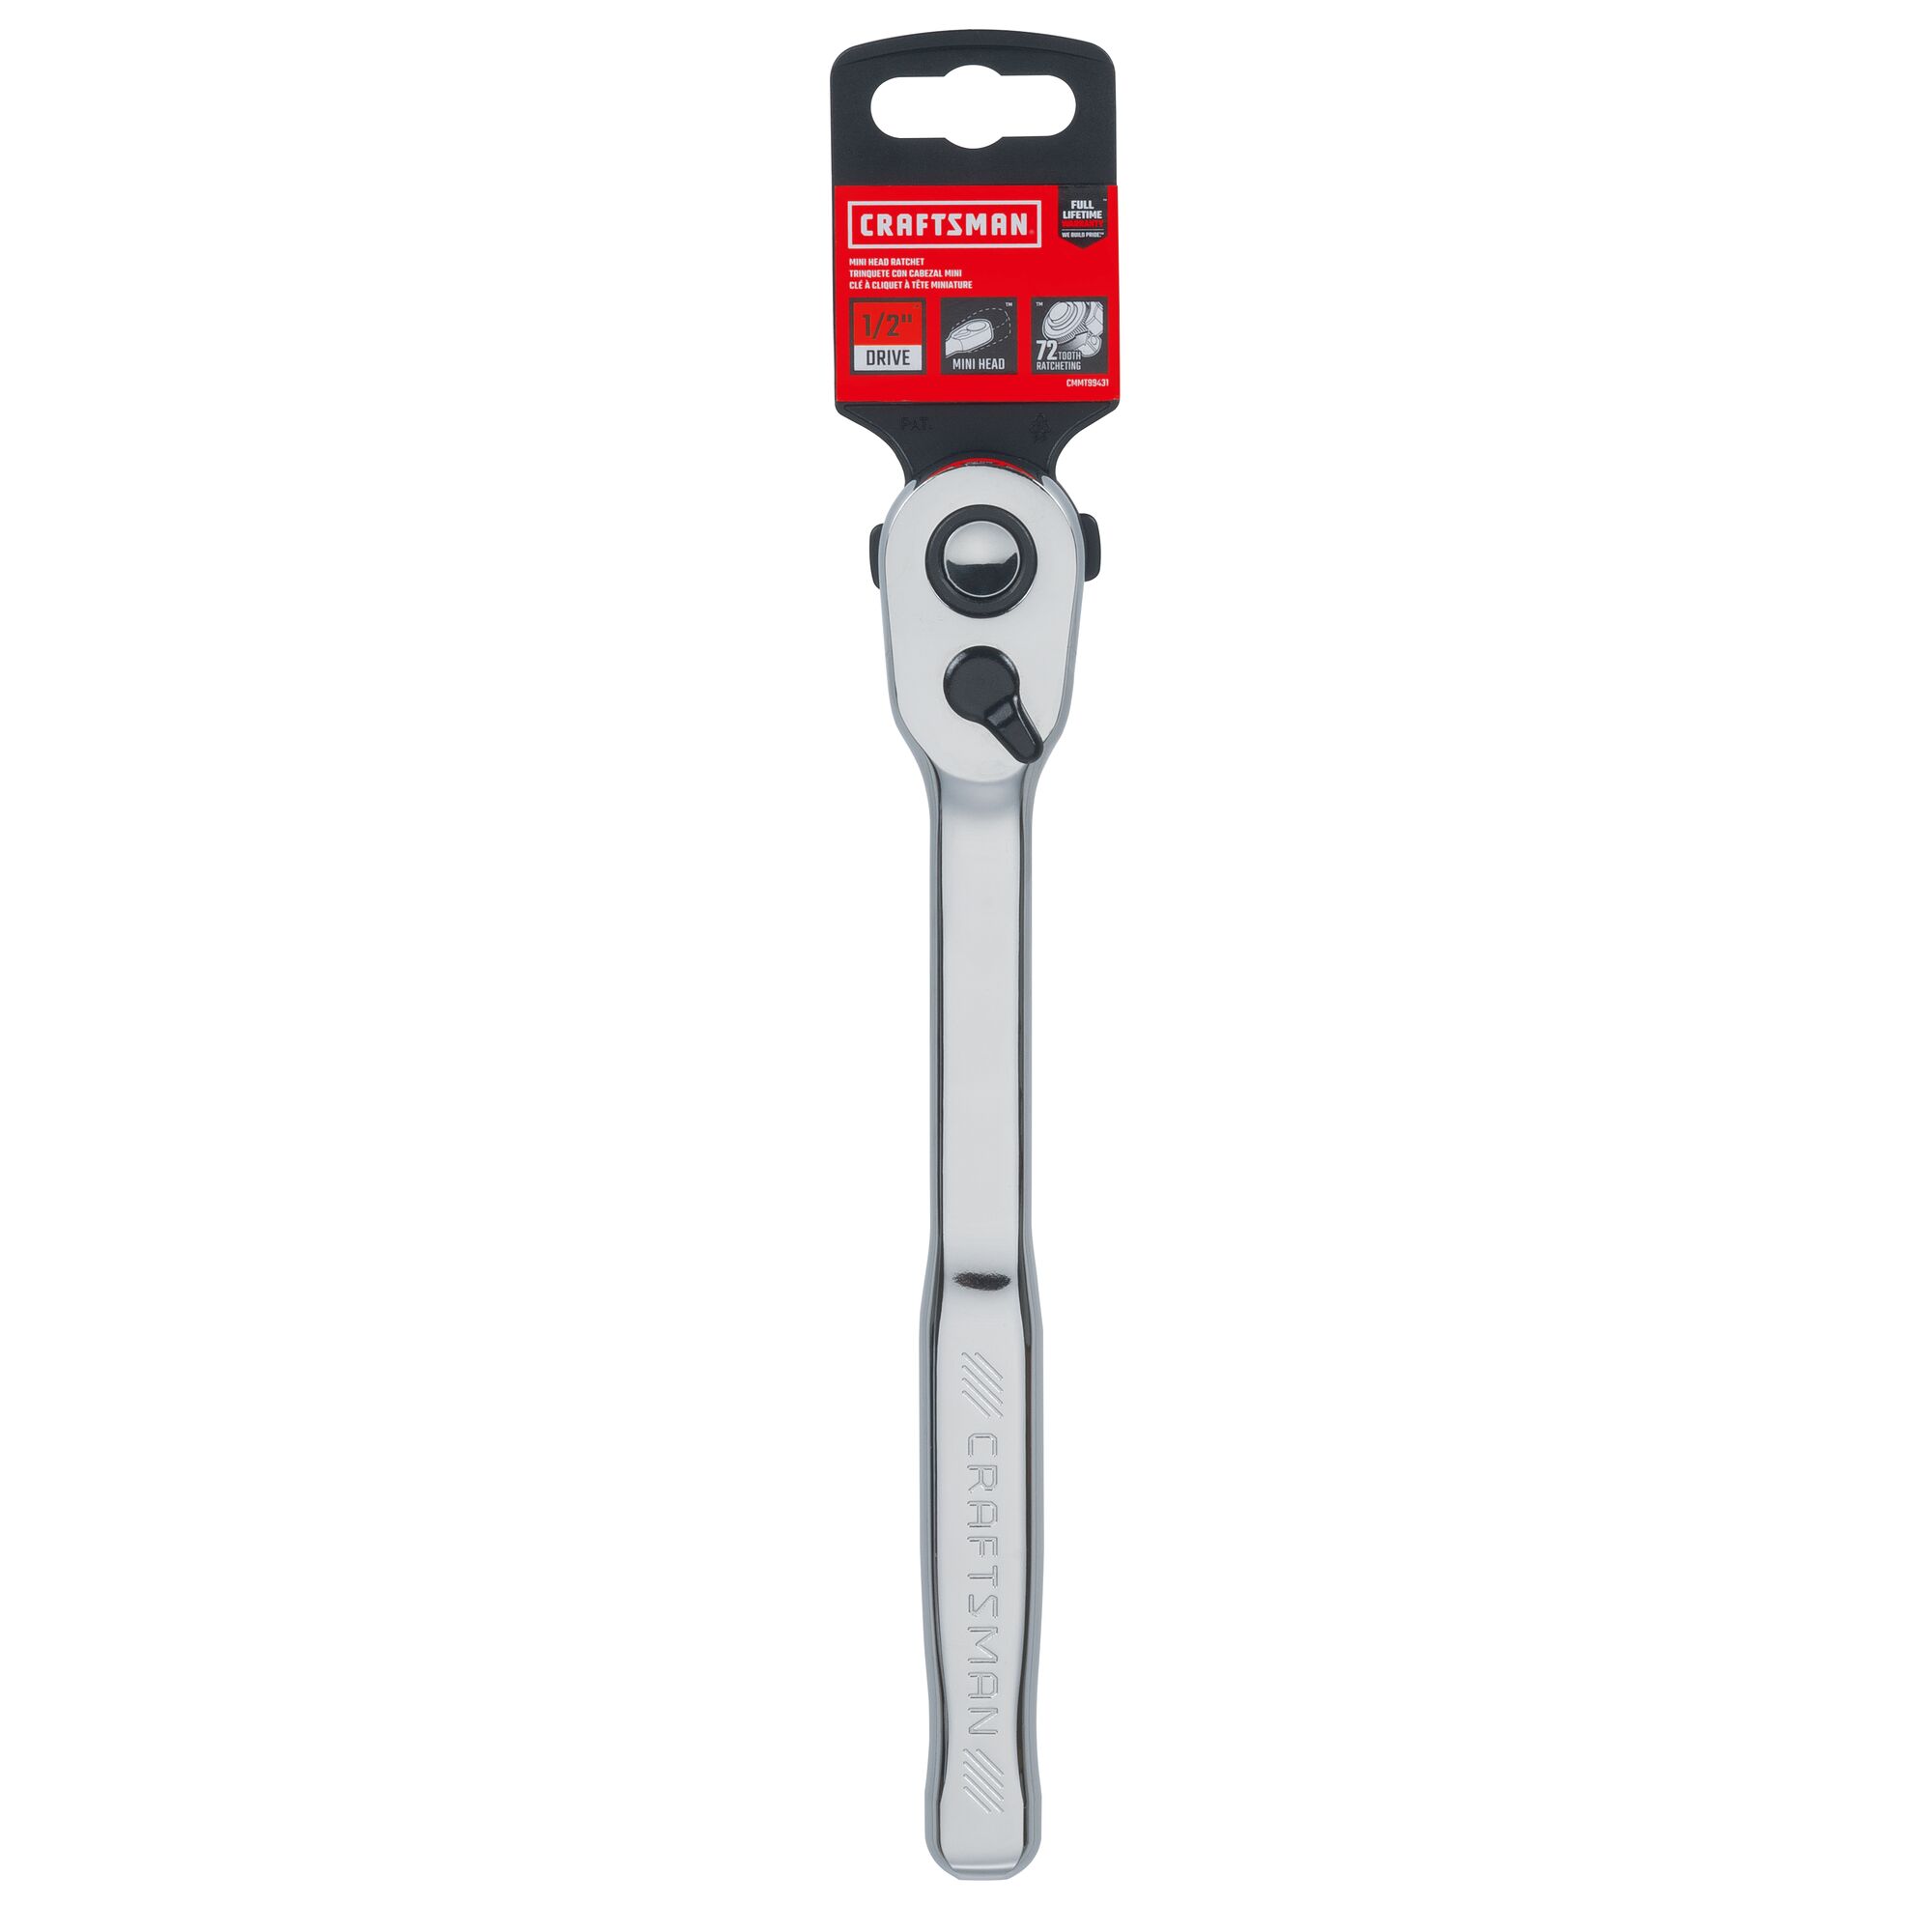 72 tooth half inch drive quick release standard ratchet with packaging tag.